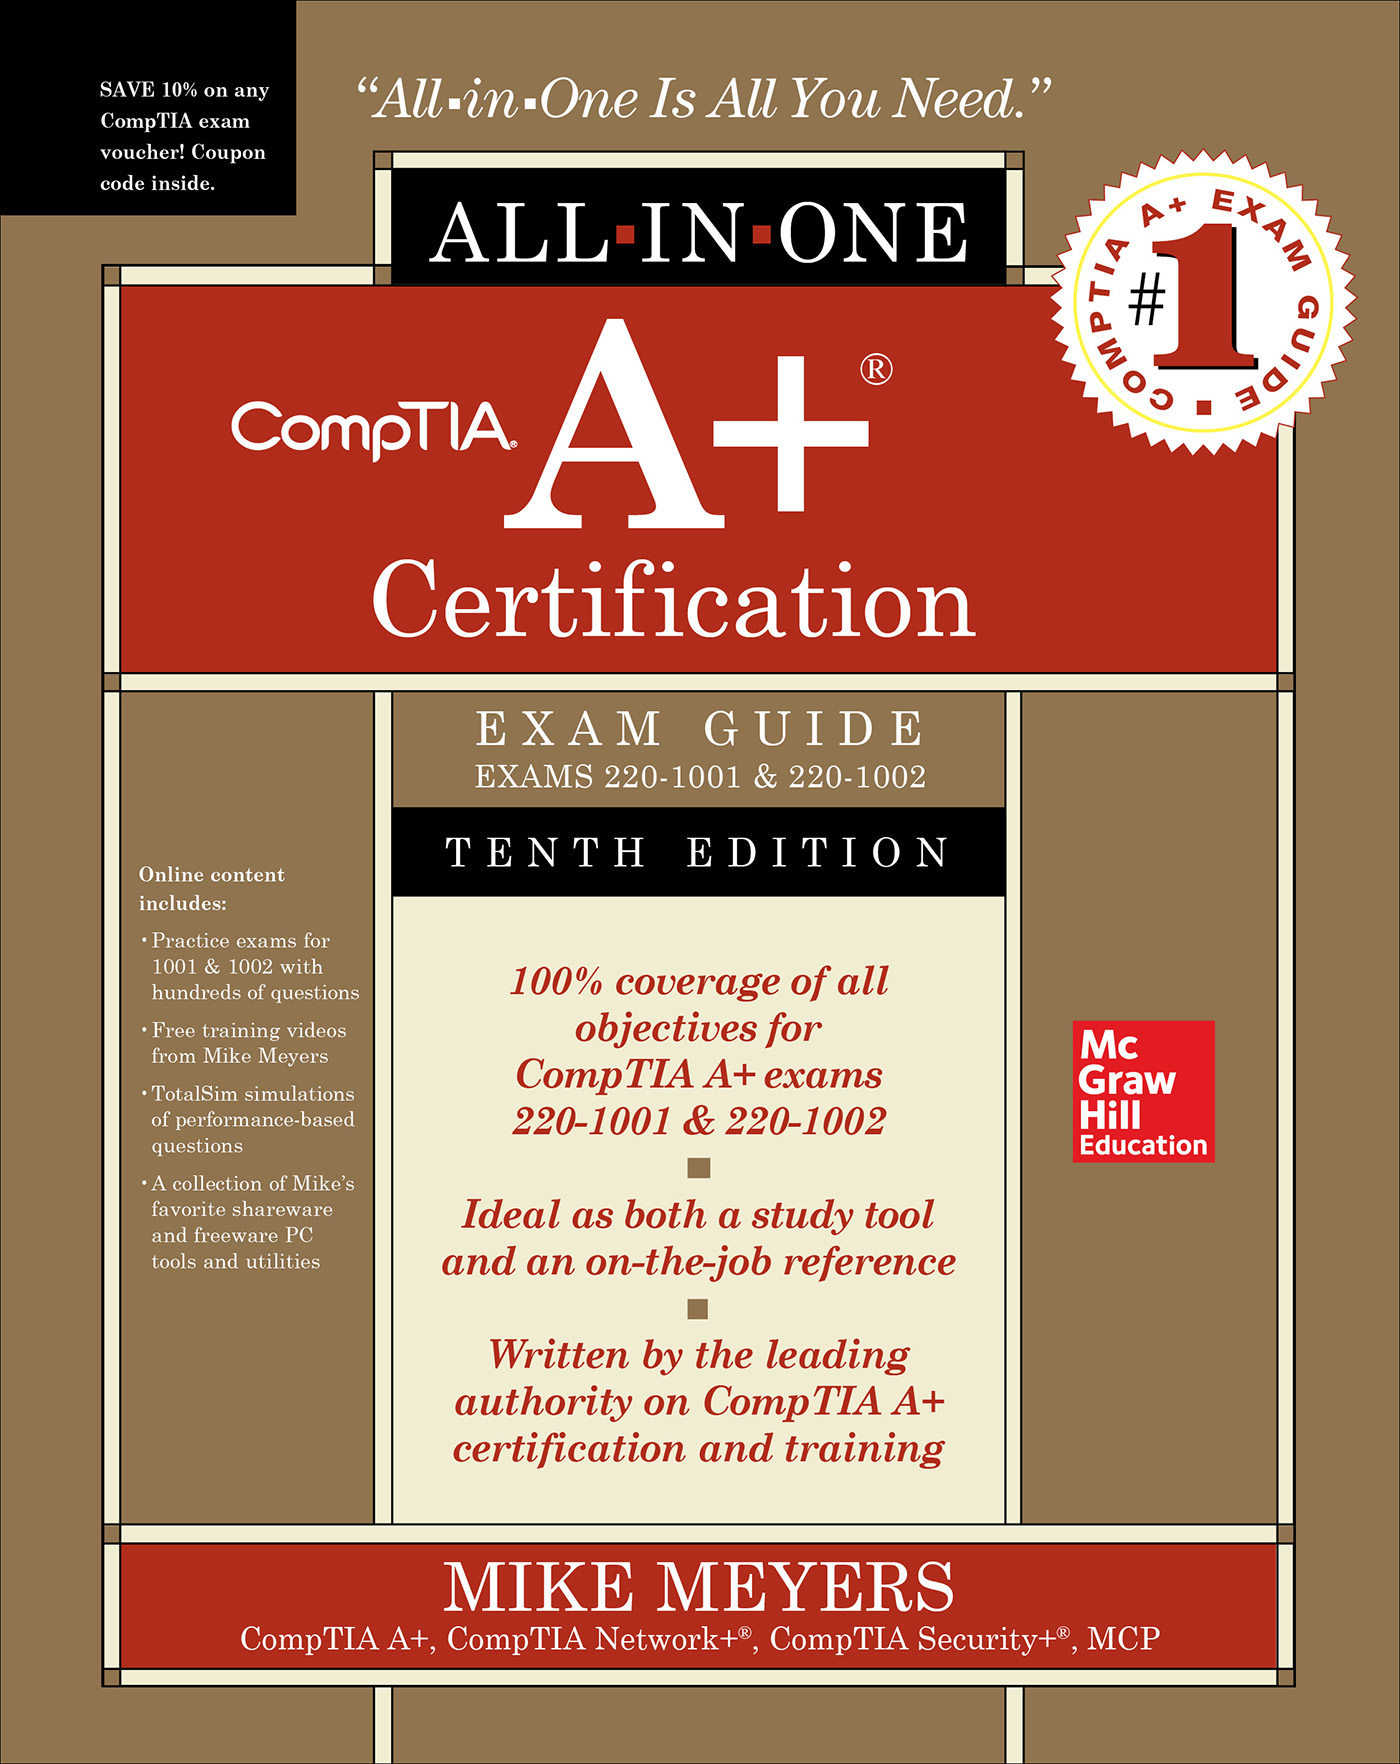 CompTIA A+ Certification All-in-One Exam Guide, Tenth Edition (Exams 220-1001 & 220-1002), 10th Edition